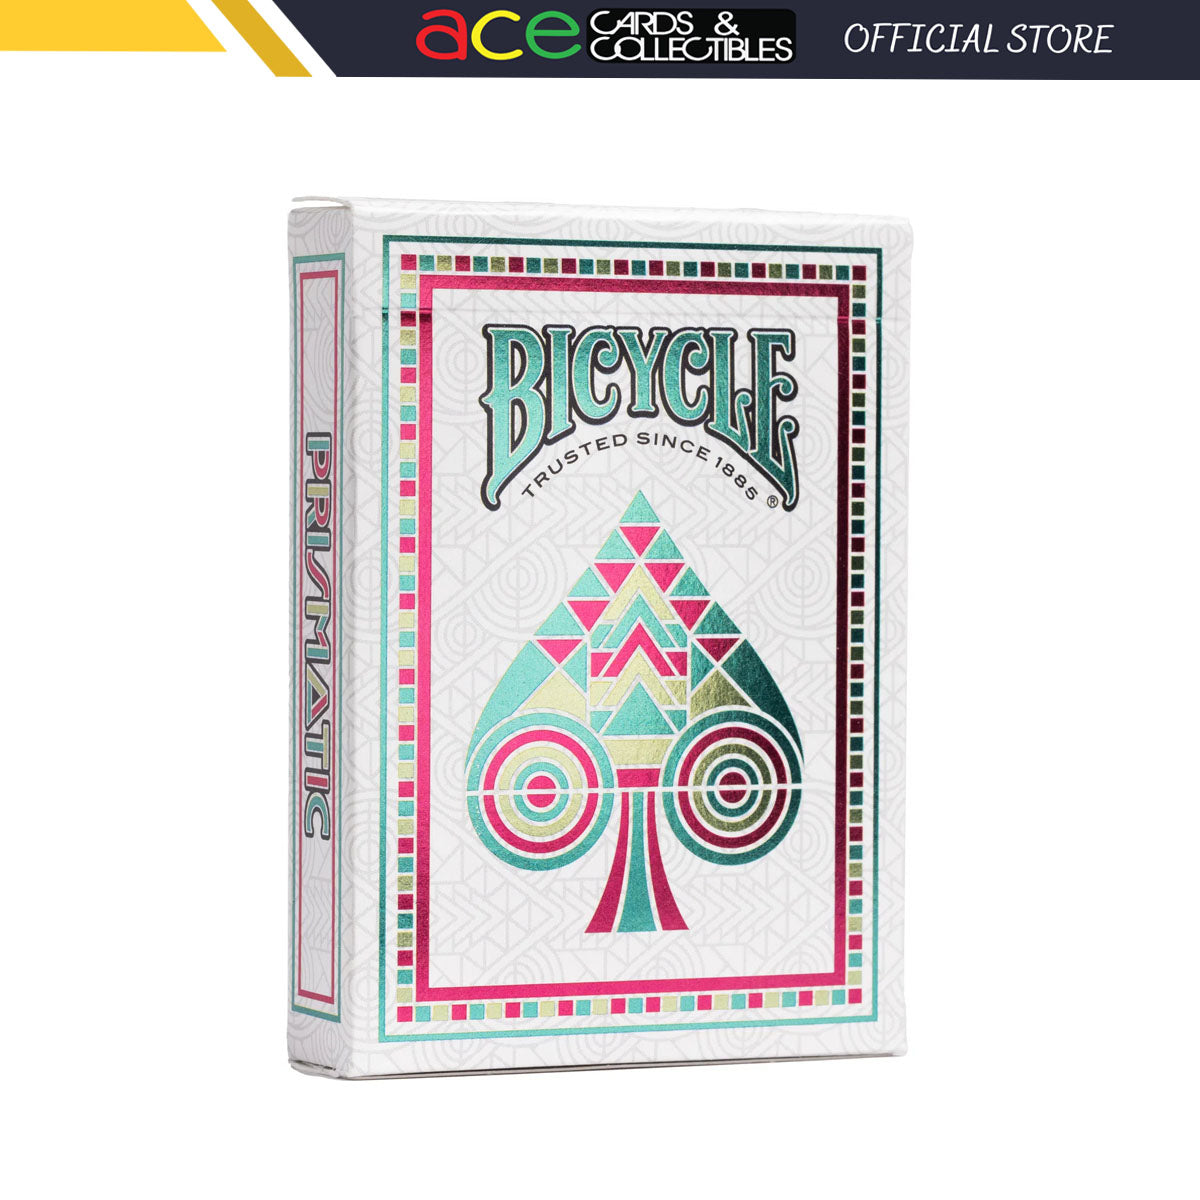 Bicycle Prismatic Playing Cards-United States Playing Cards Company-Ace Cards & Collectibles